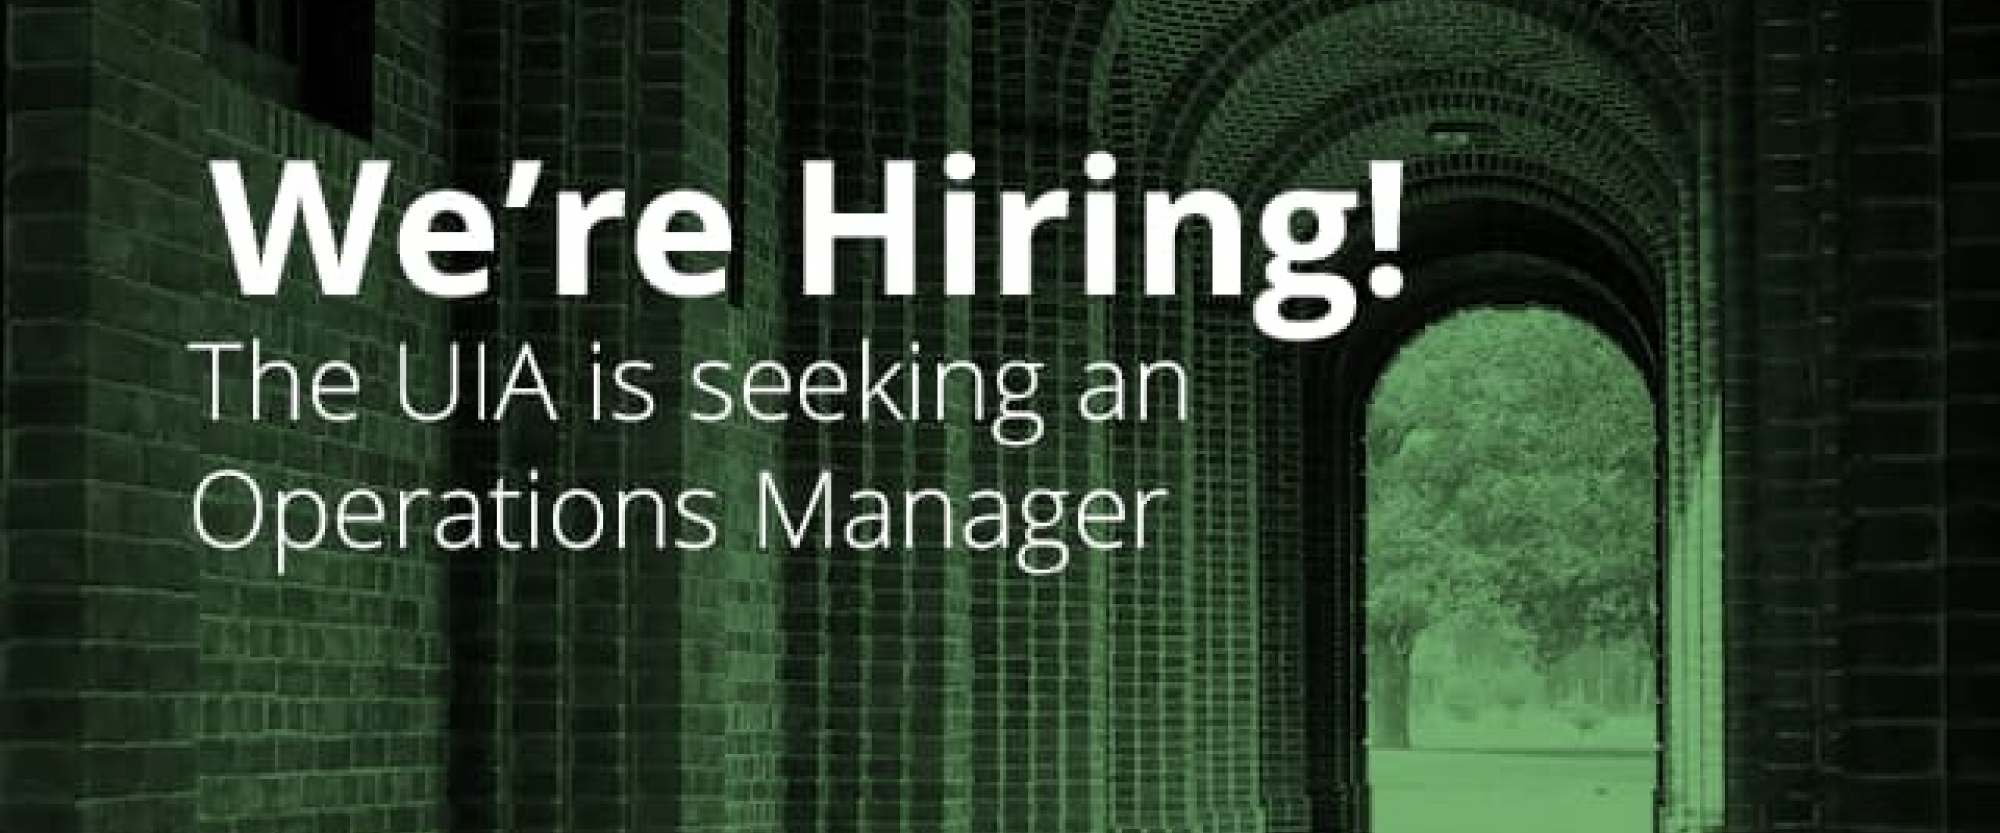 We're hiring an Operations Manager